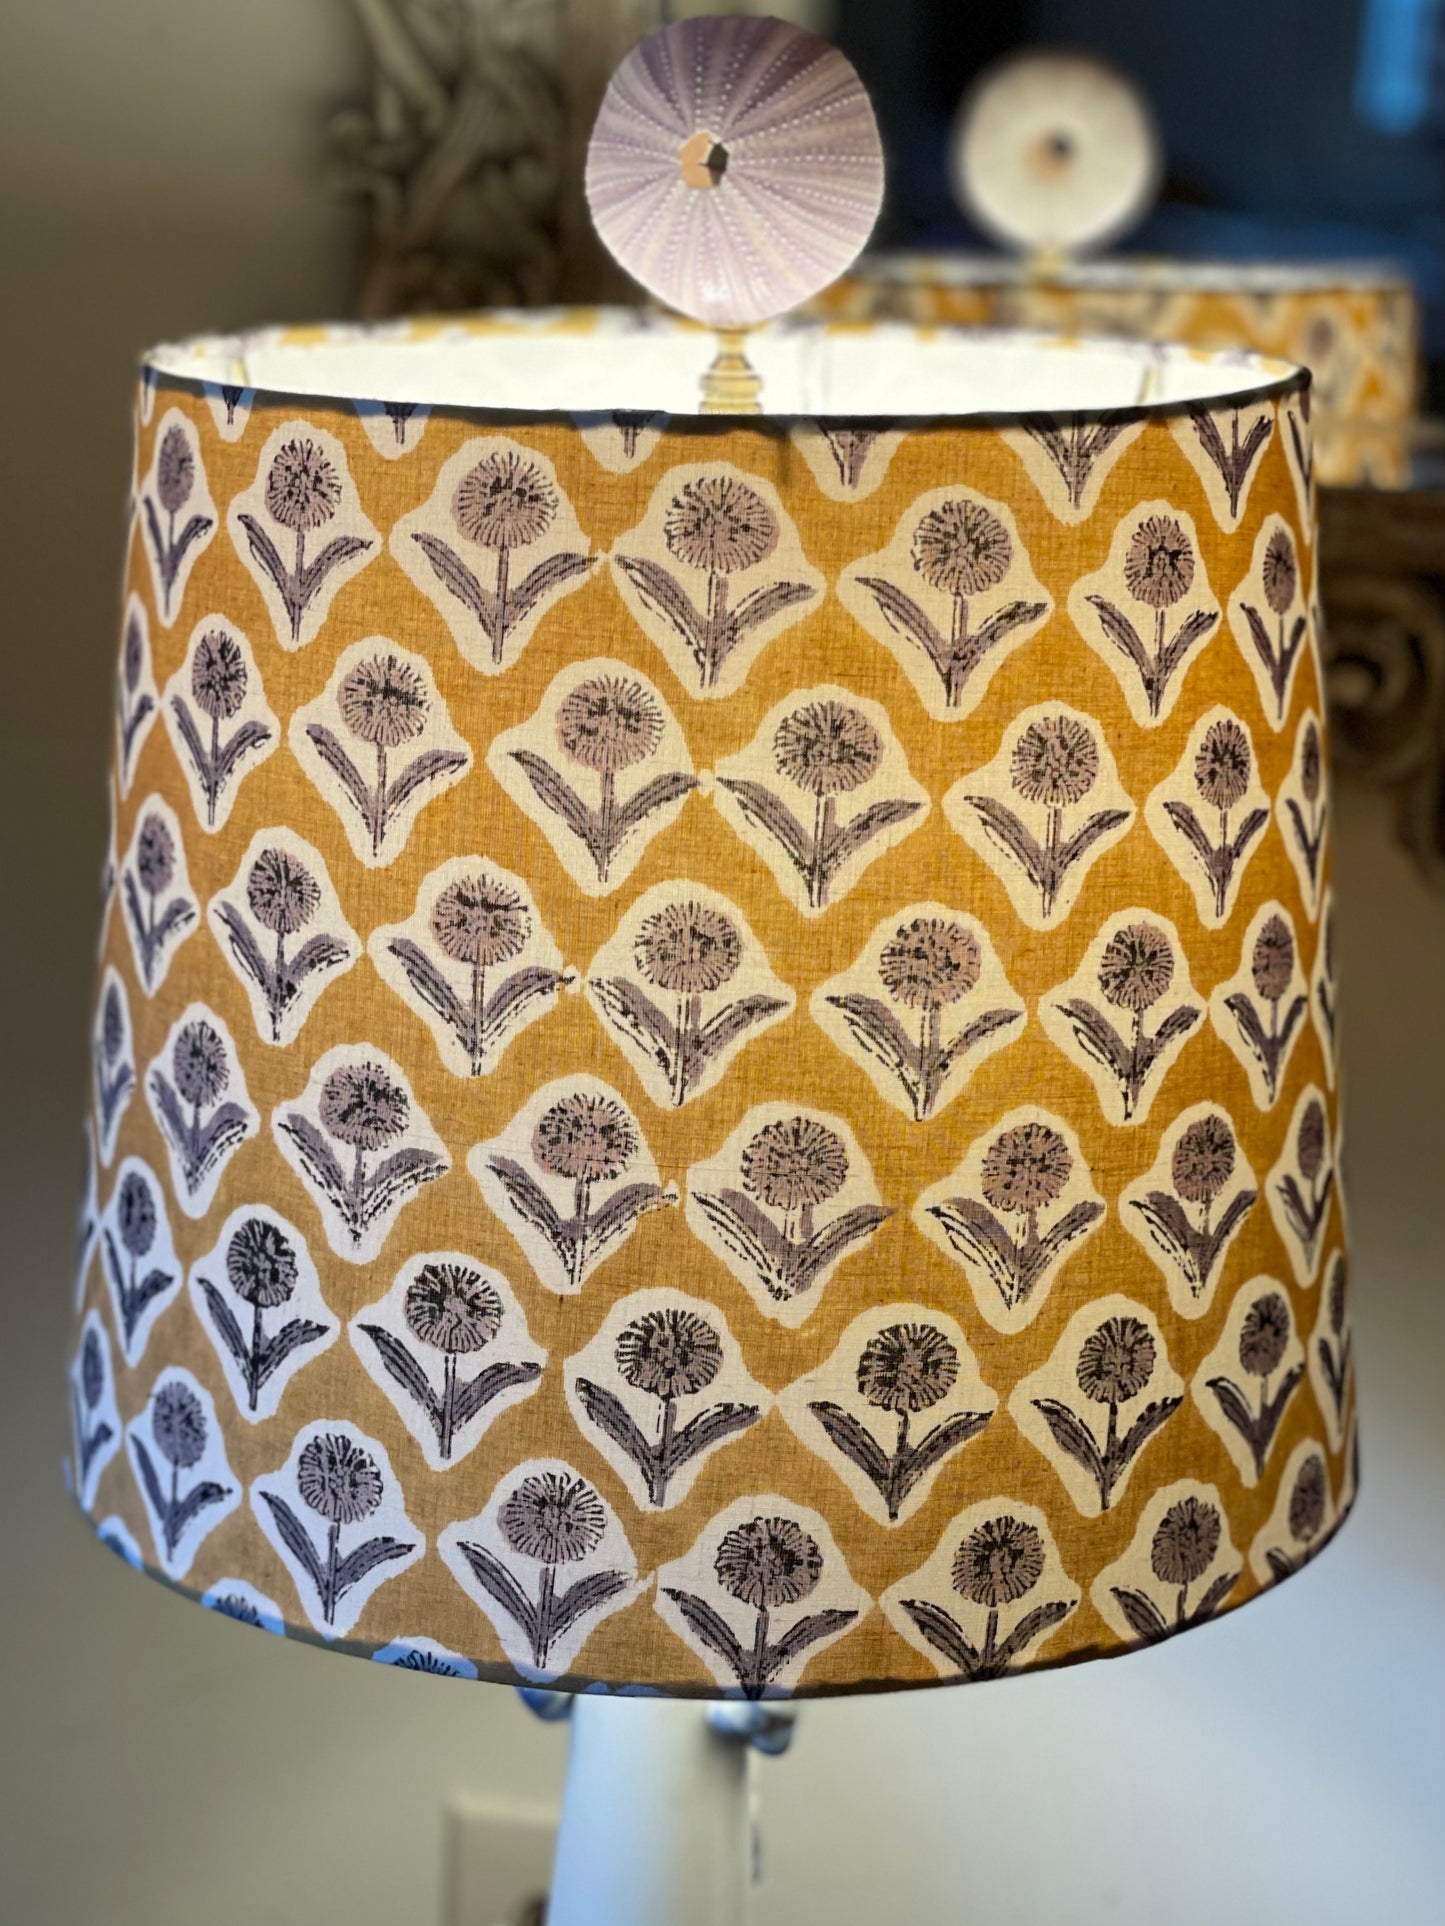 Medium Empire Lampshade. Indian Block print from Jaipur. Harvest Gold with Black and Gray Floral Motif.